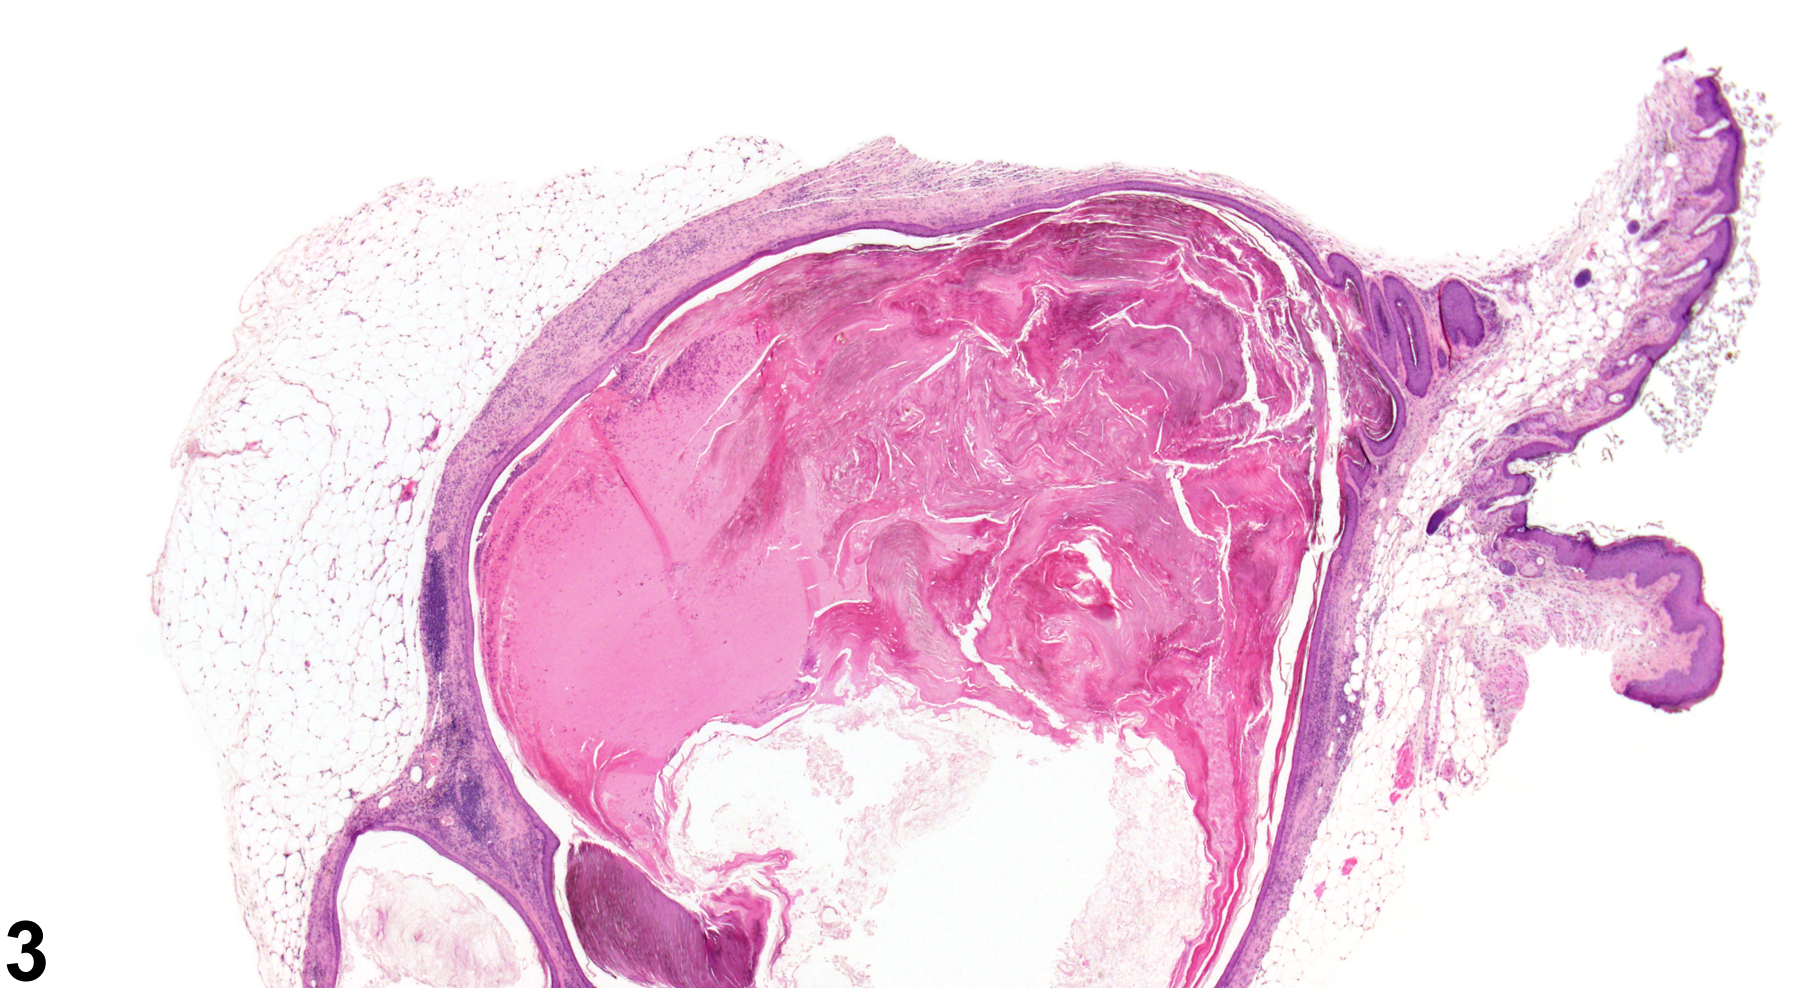 Image of duct dilation in the clitoral gland from a female B6C3F1 mouse in a chronic study